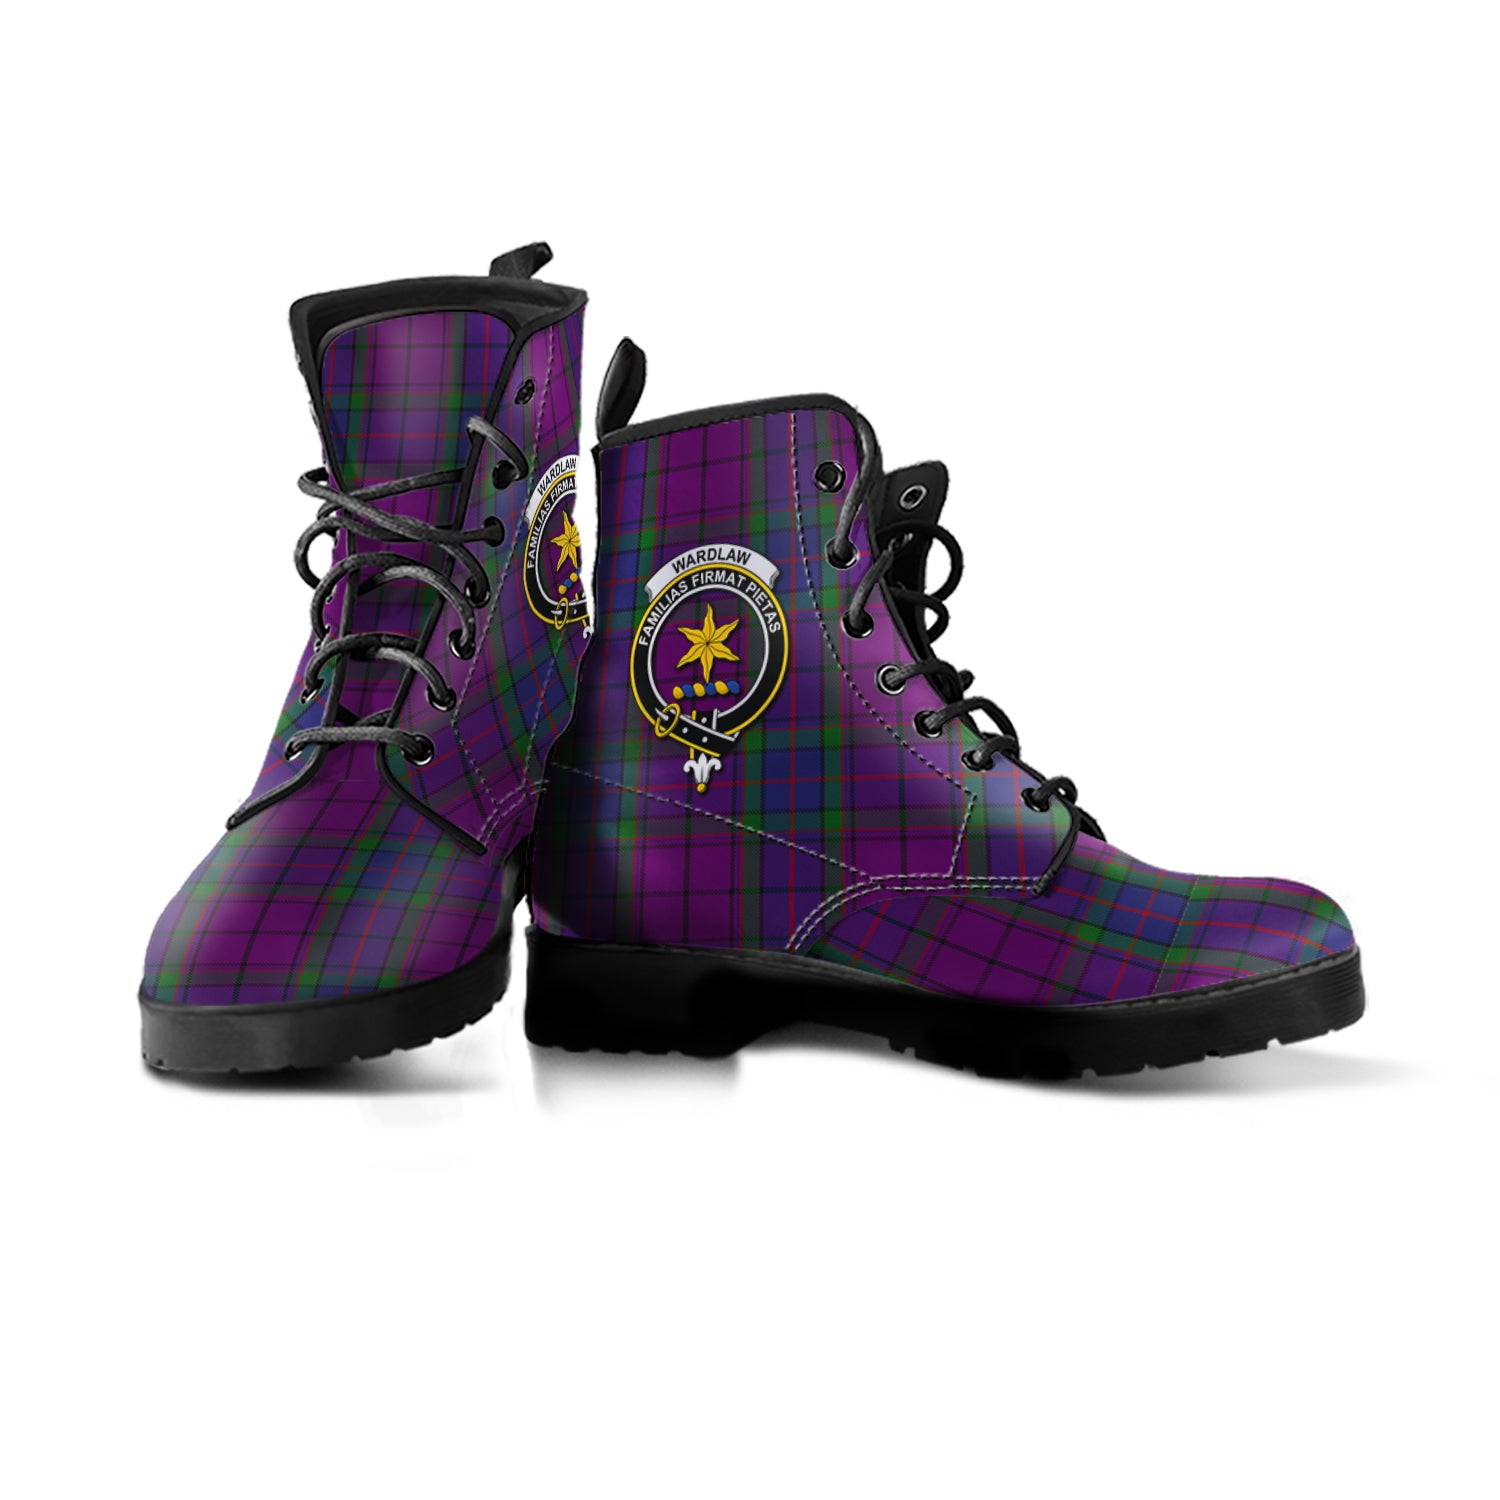 wardlaw-tartan-leather-boots-with-family-crest